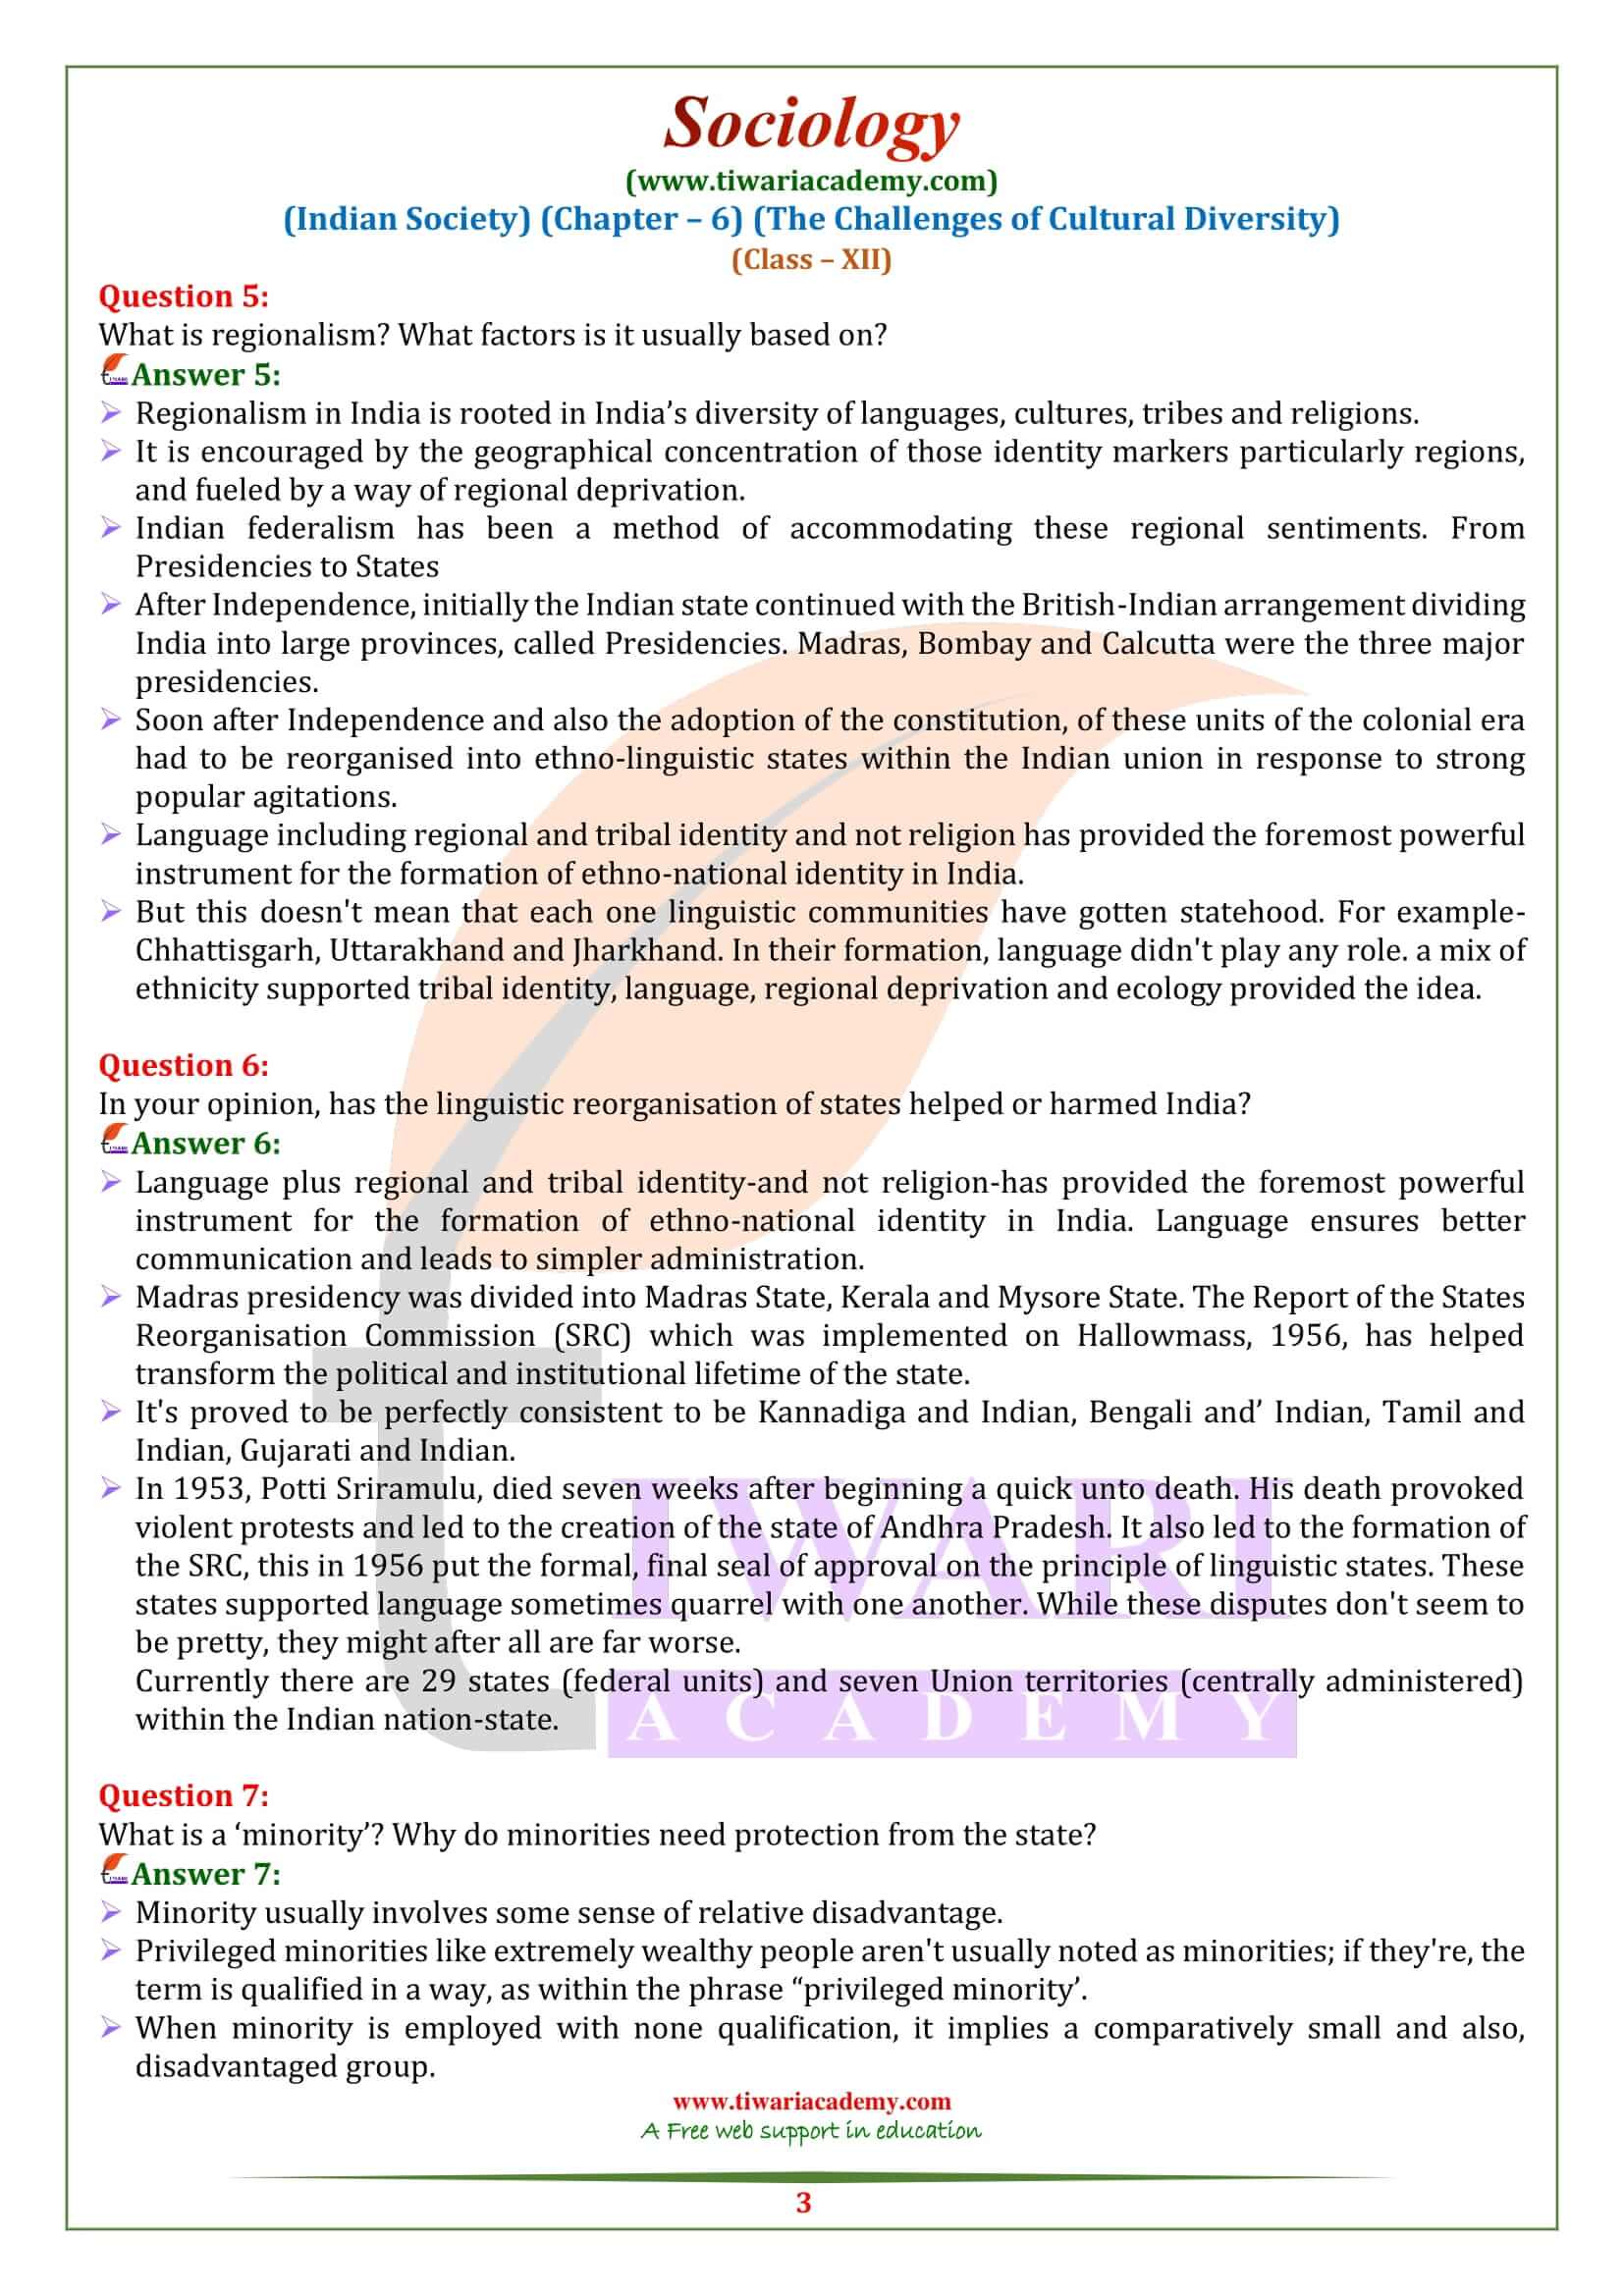 NCERT Solutions for Class 12 Sociology Chapter 6